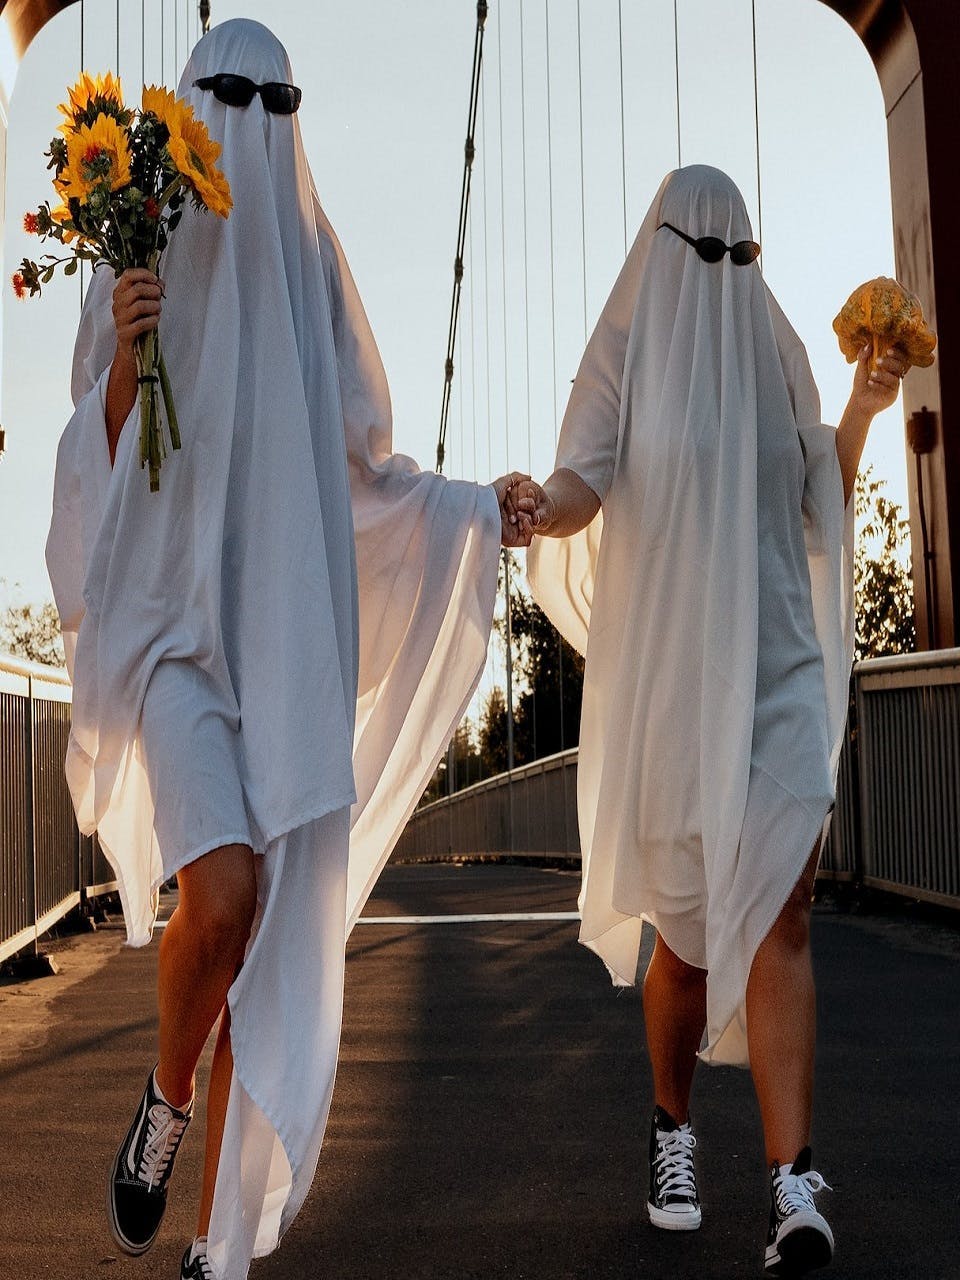 Two people dressed as ghosts in sheets walking